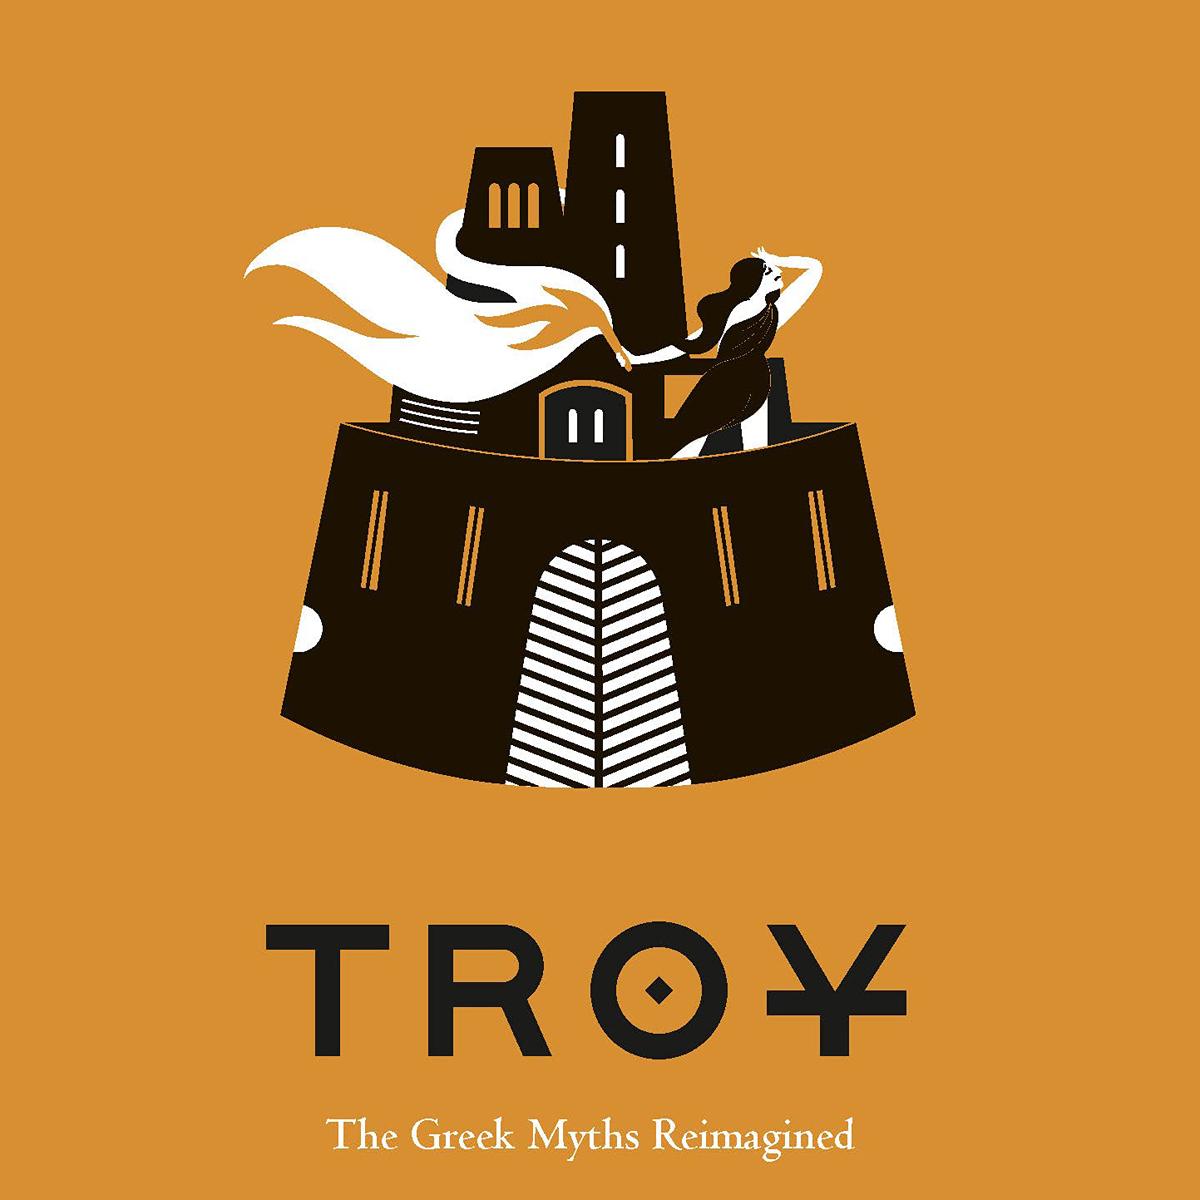 Troy The Greek Myths Reimagined eBook for $1.99